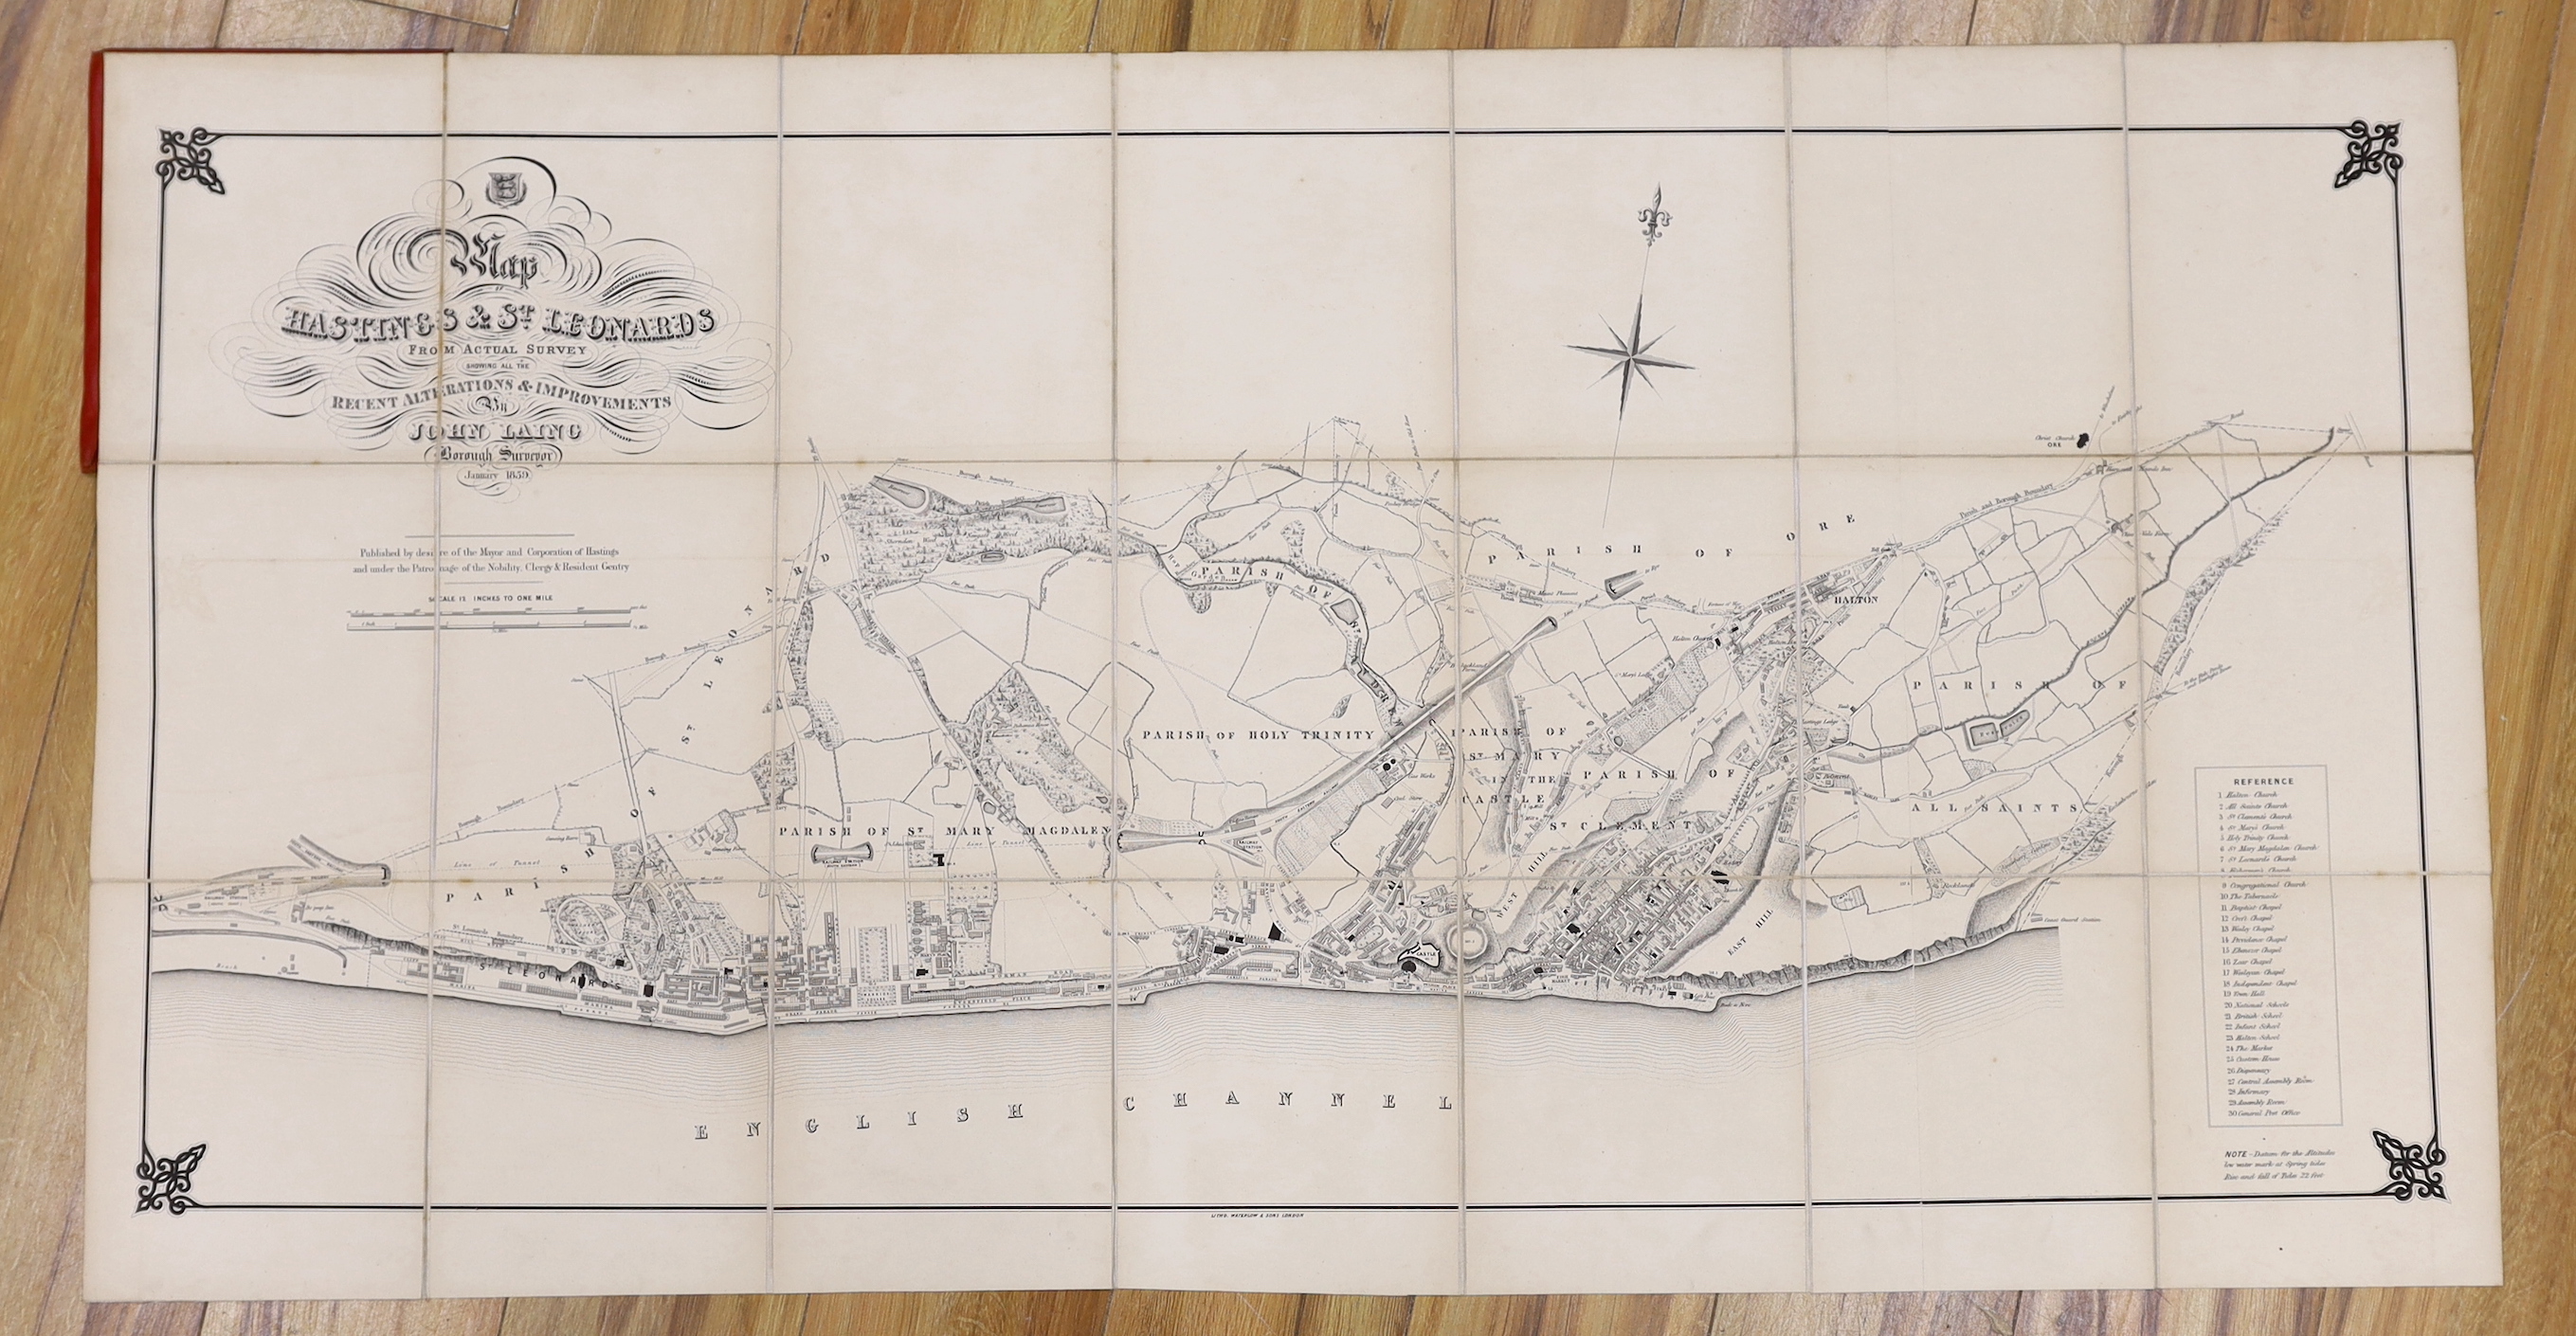 HASTINGS - Laing, John (Borough Surveyor) - Map of Hastings and St. Leonards, on linen in red cloth binding with gilt lettering, scale: 12 inches to 1 mile, Hastings, January 1859, 68.5 x 131cms